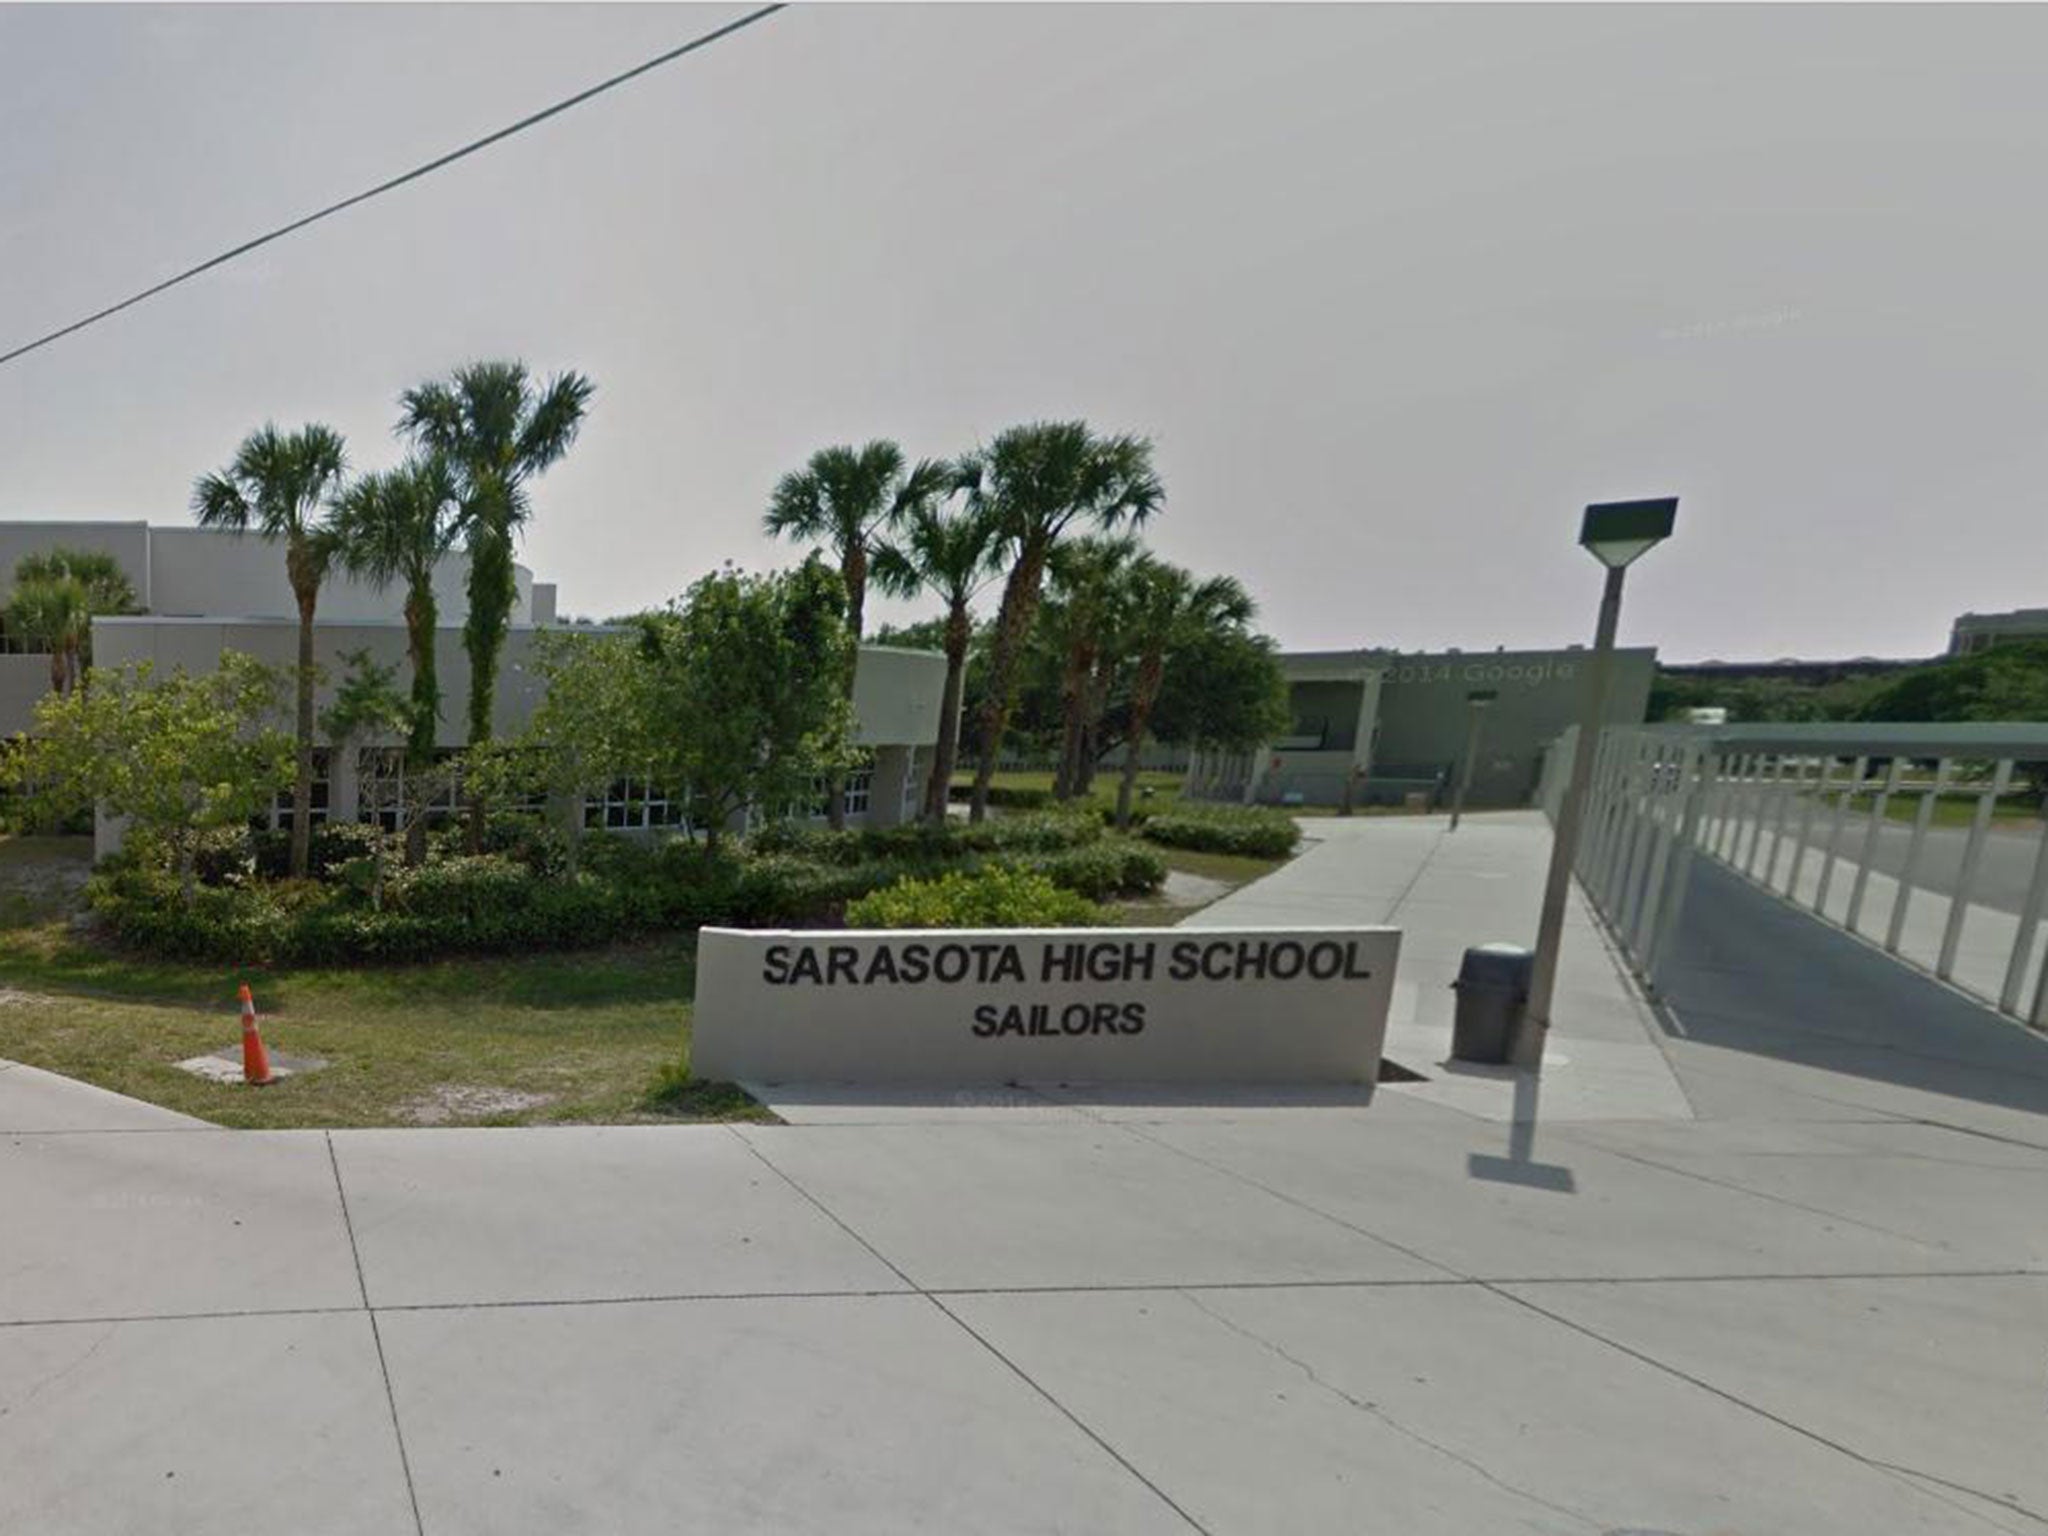 One of the suspects attended Sarasota High School in Florida